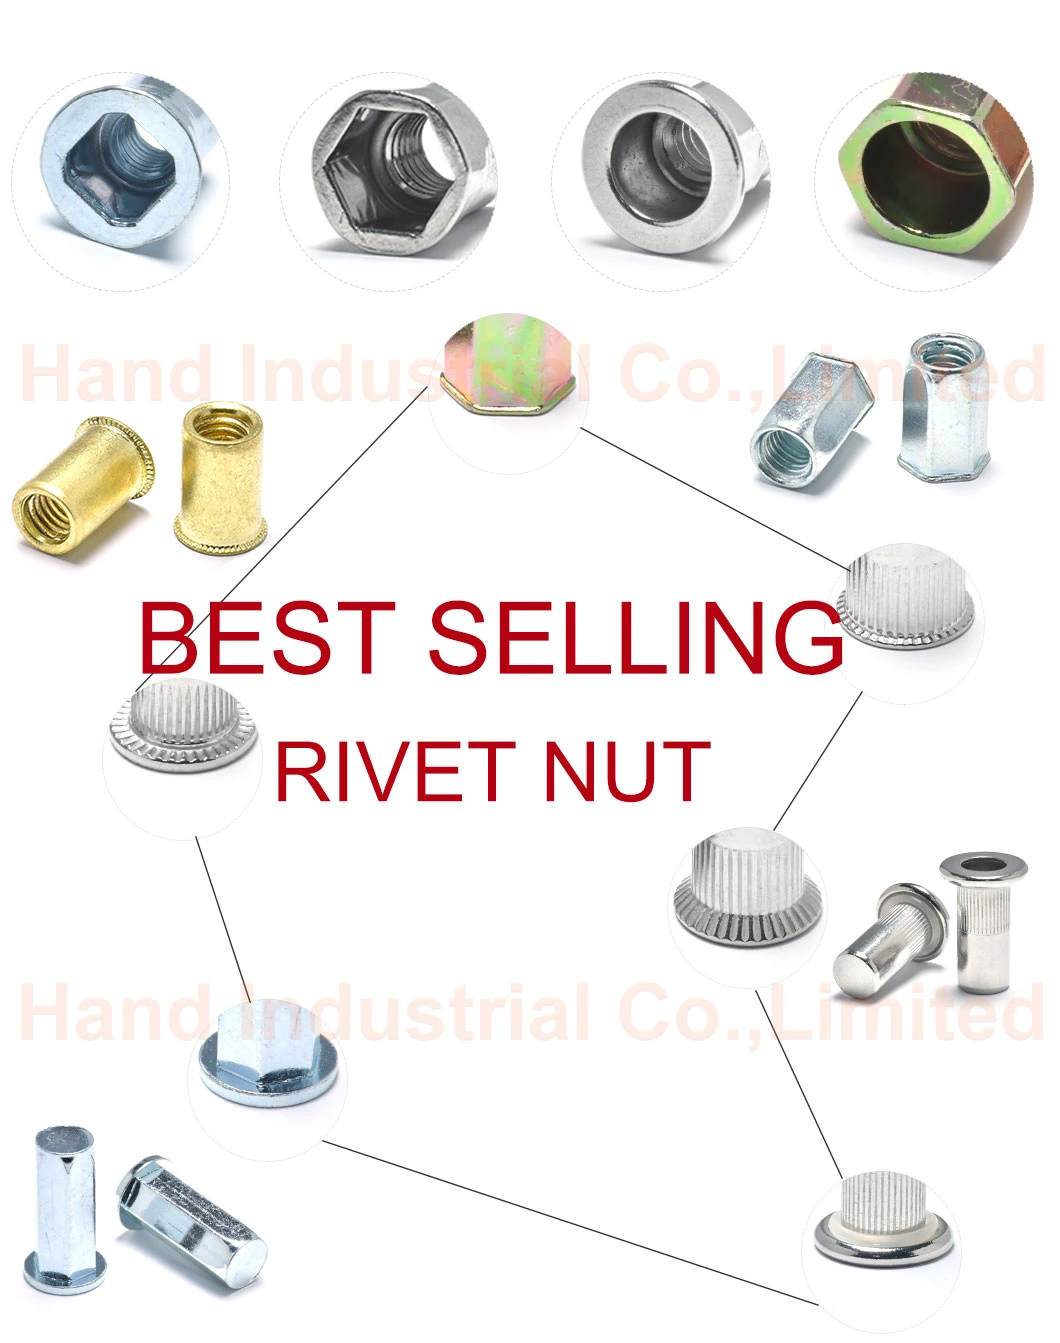 Zinc Plated M6 M8 M10 Steel Reduced Head Knurled Body Rivet Nuts with Open End